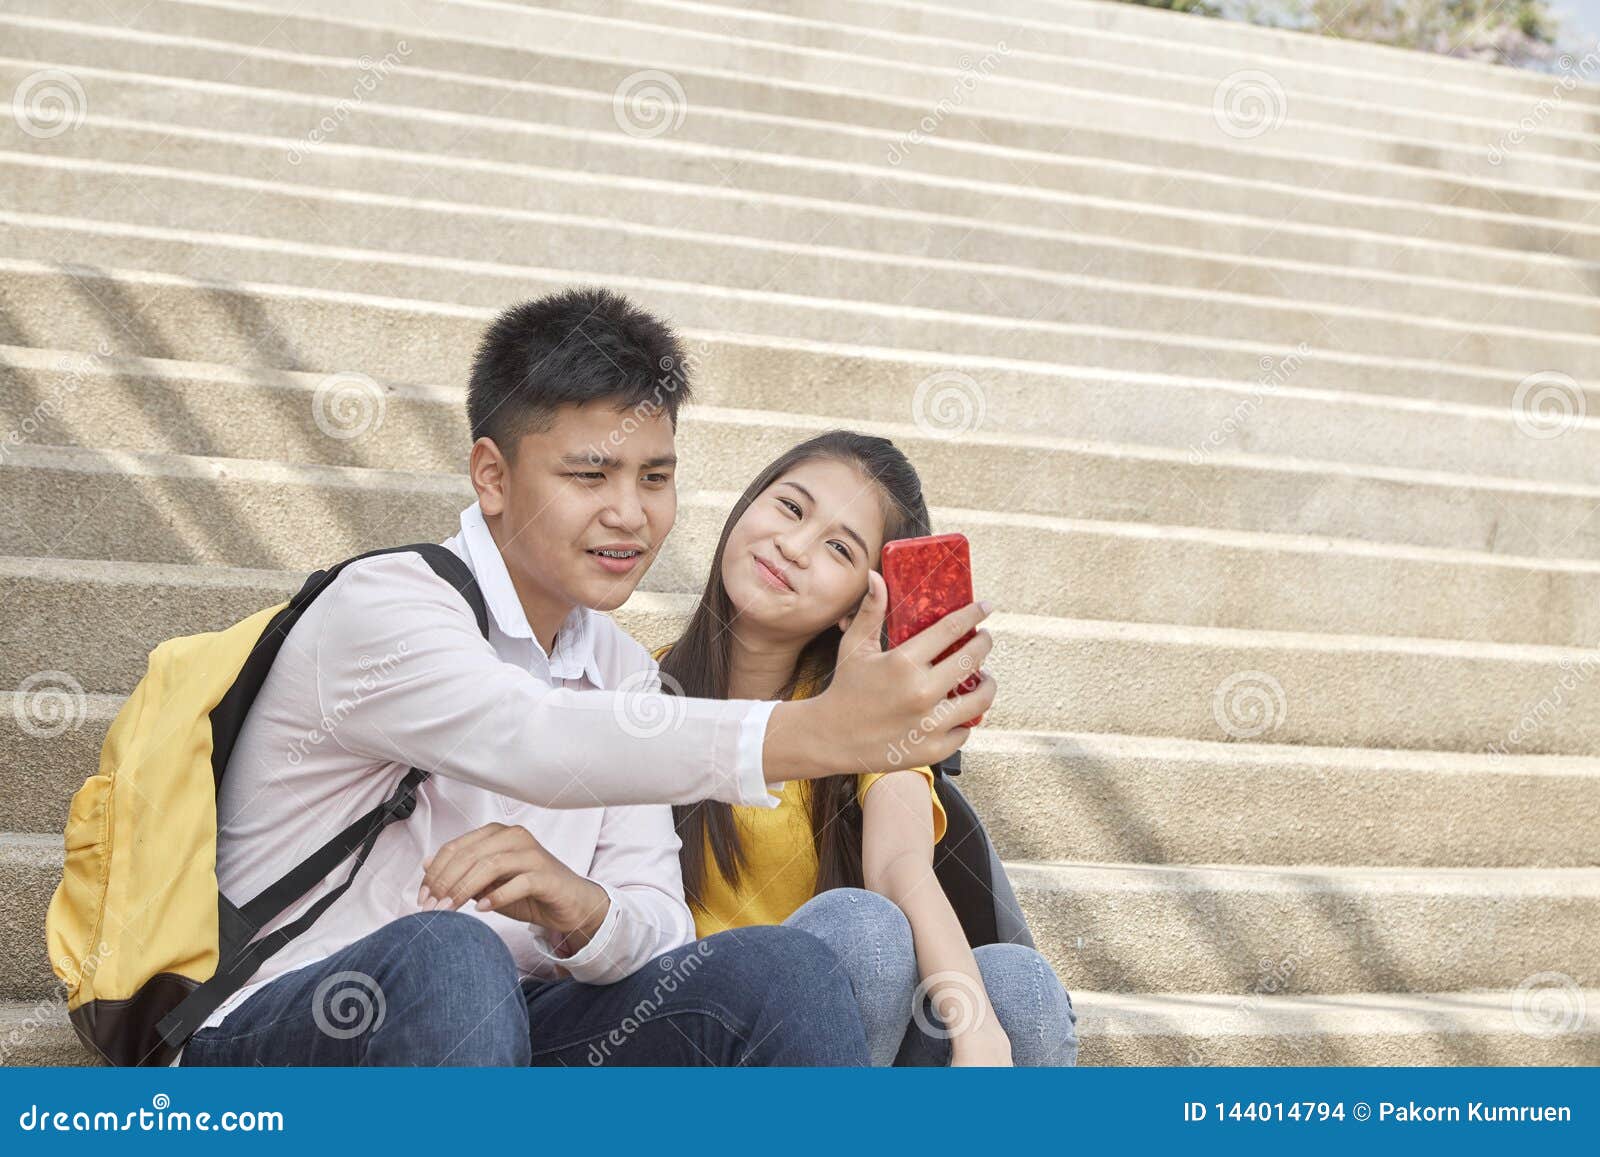 Selfie-portrait of Funny Couple Outdoor Stock Photo - Image of camera ...